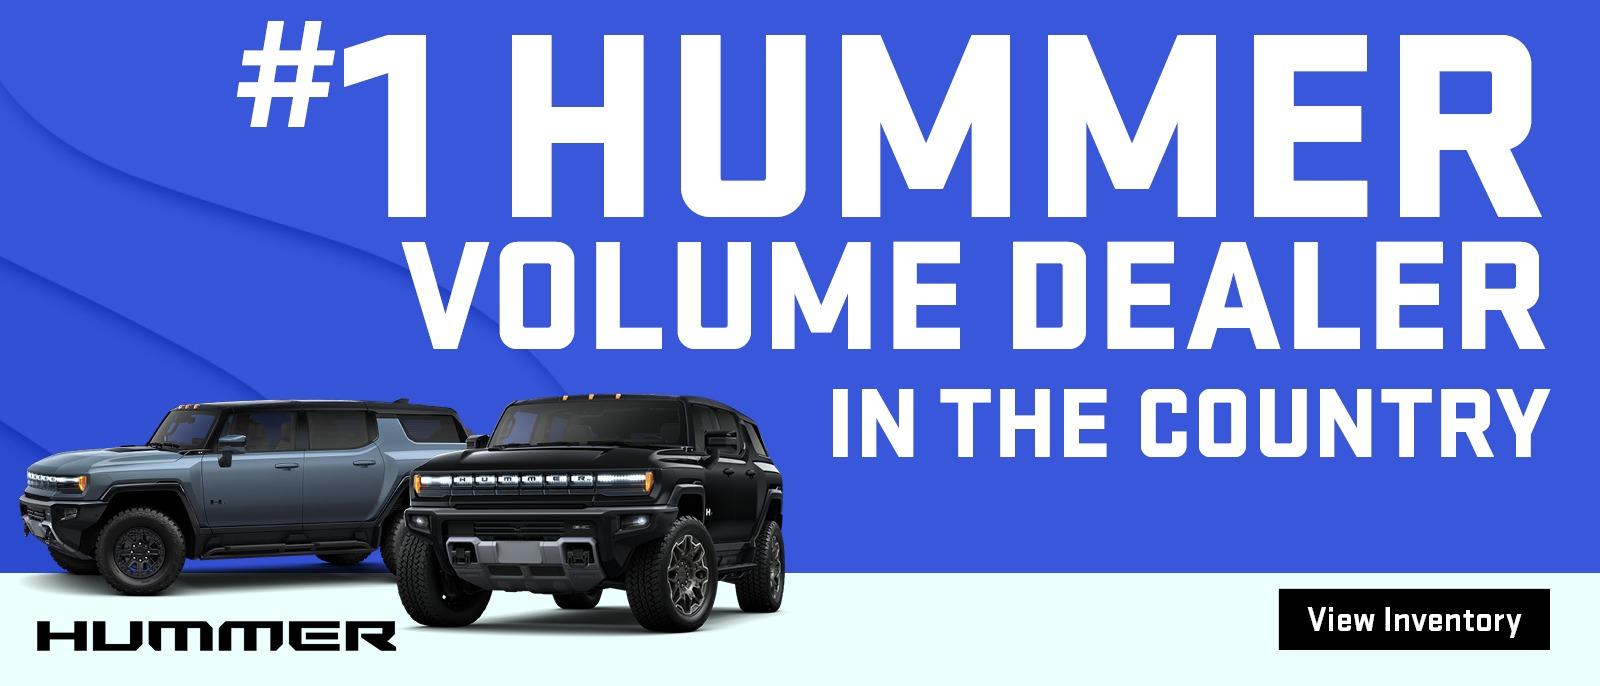 #1 HUMMER VOLUME DEALER IN THE COUNTRY